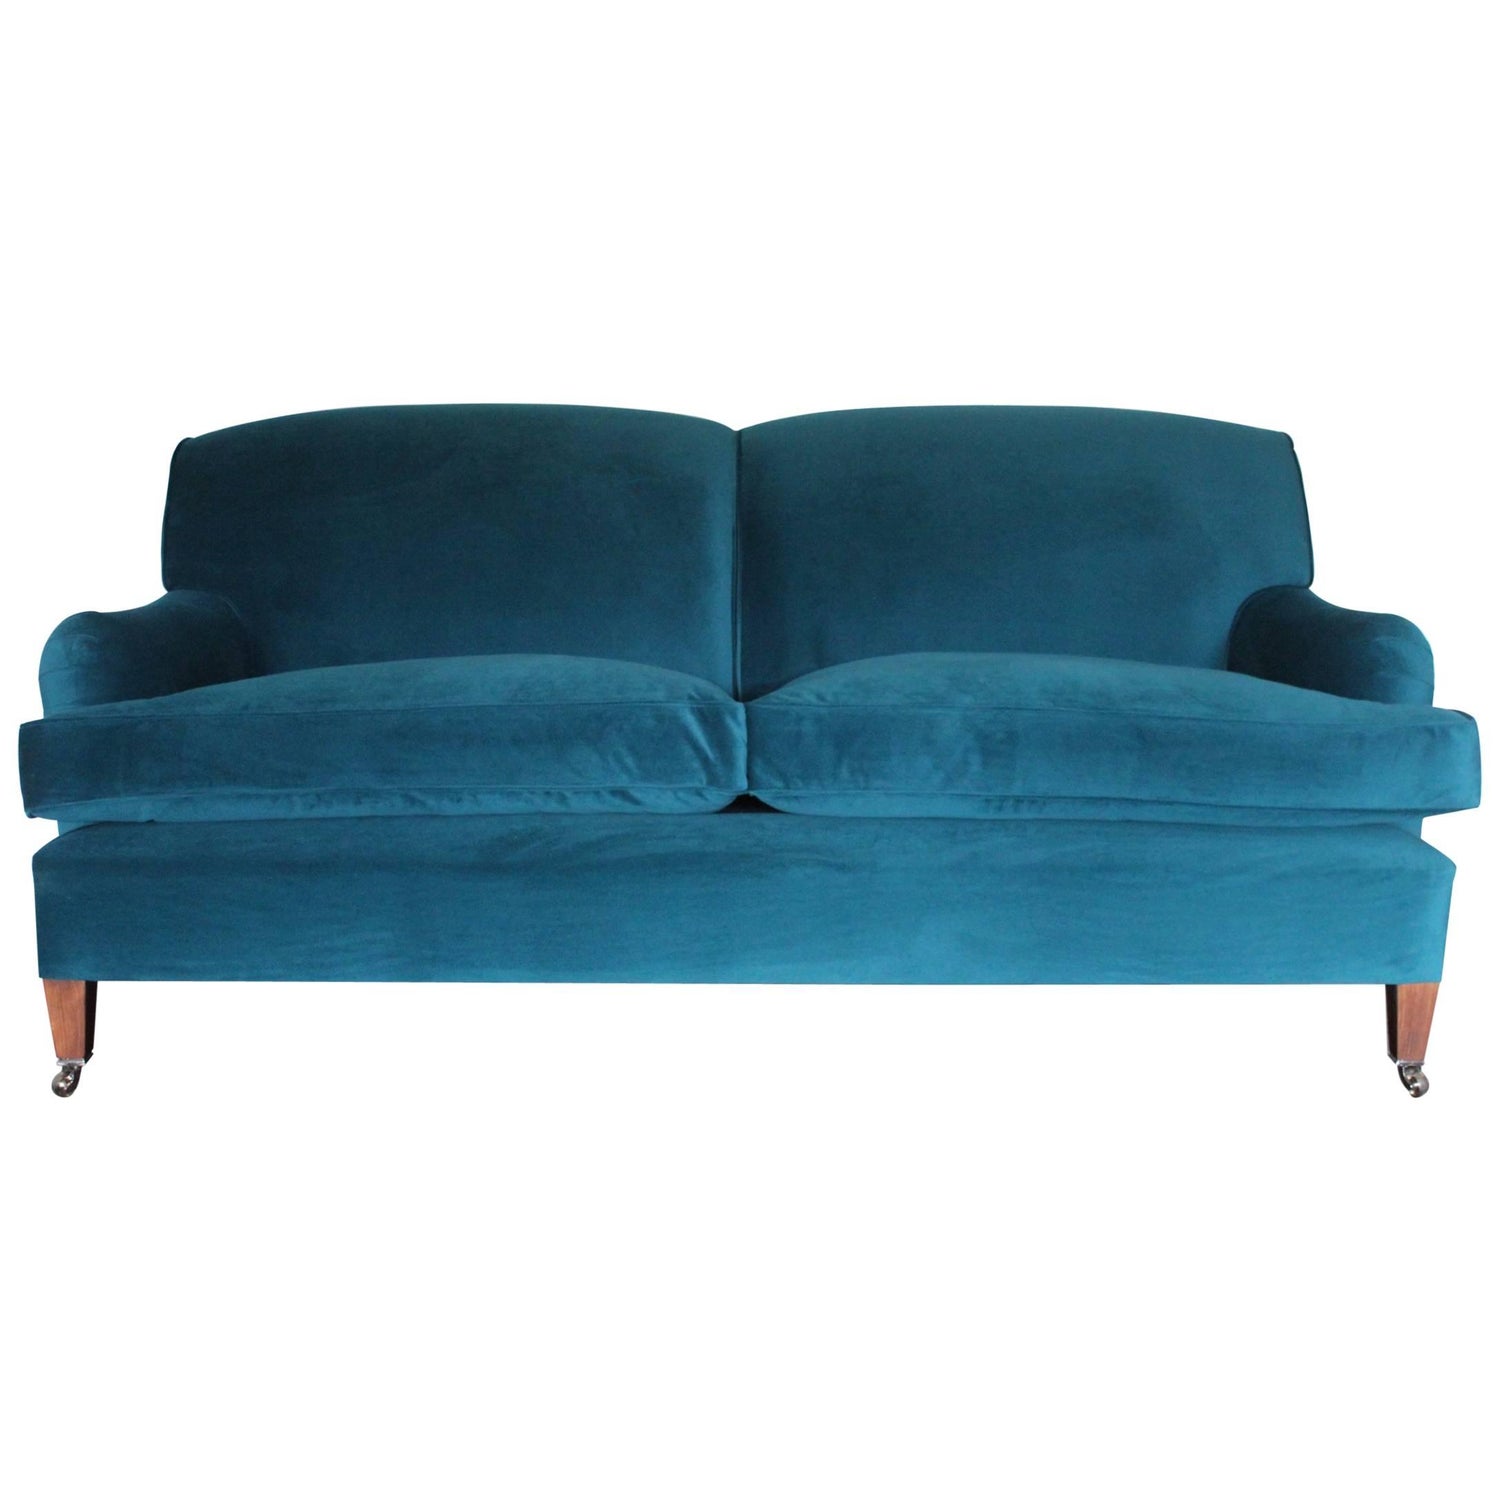 George Smith Signature Standard Arm Sofa In Teal Green Blue